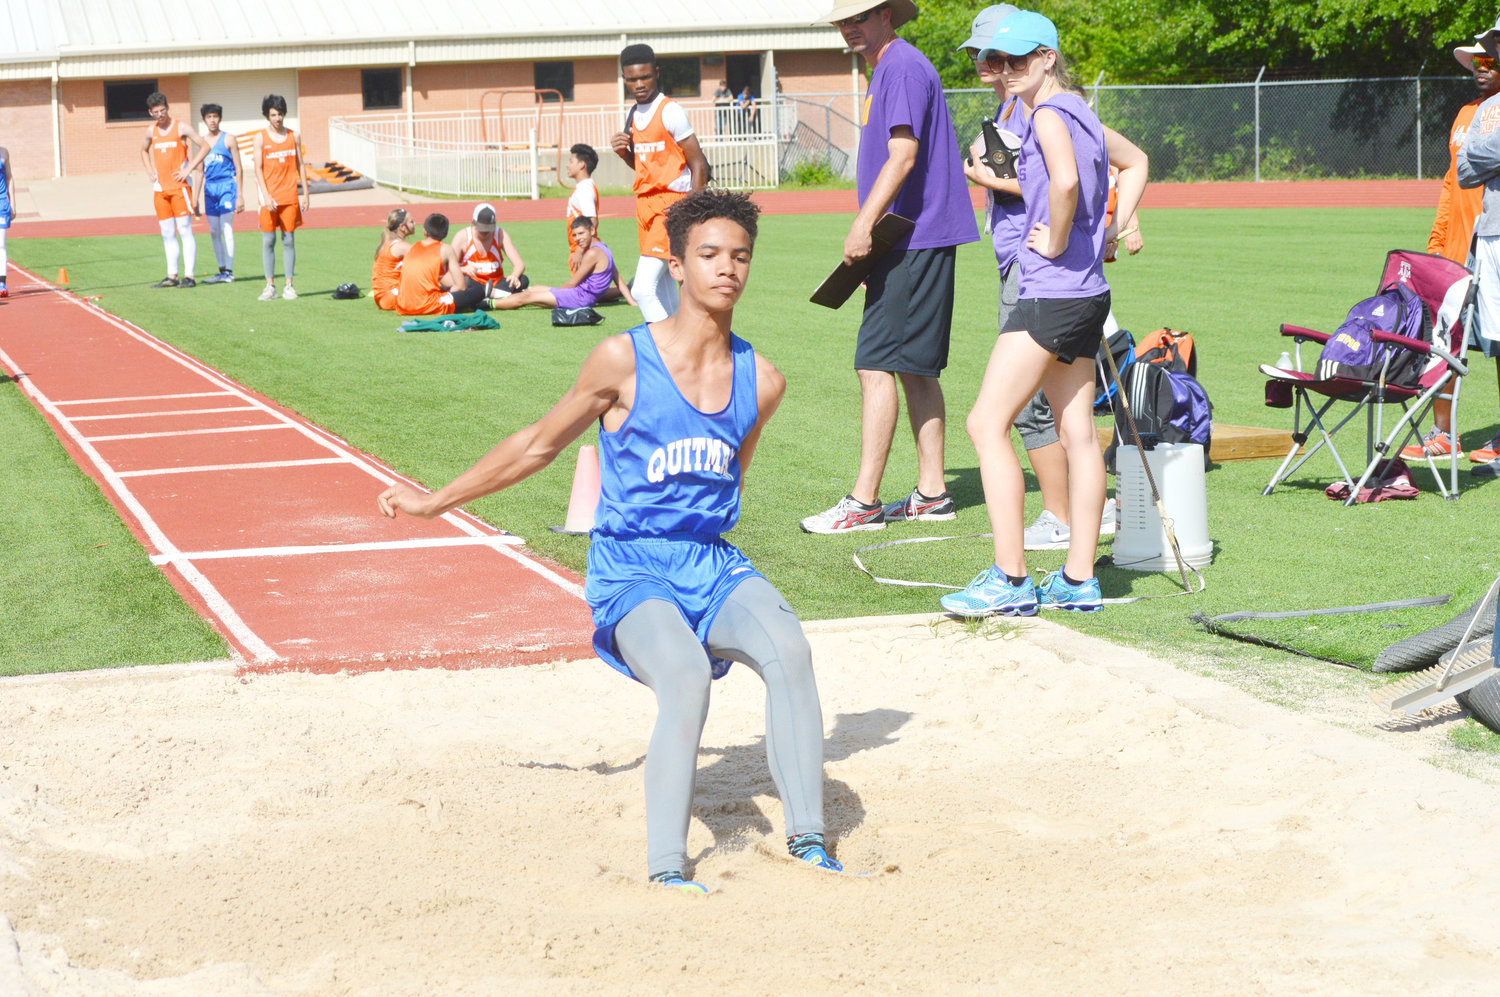 Quitman’s Aiden Stewart has a nice landing at the junior high track meet held in Mineola. (Monitor photo by Larry Tucker)